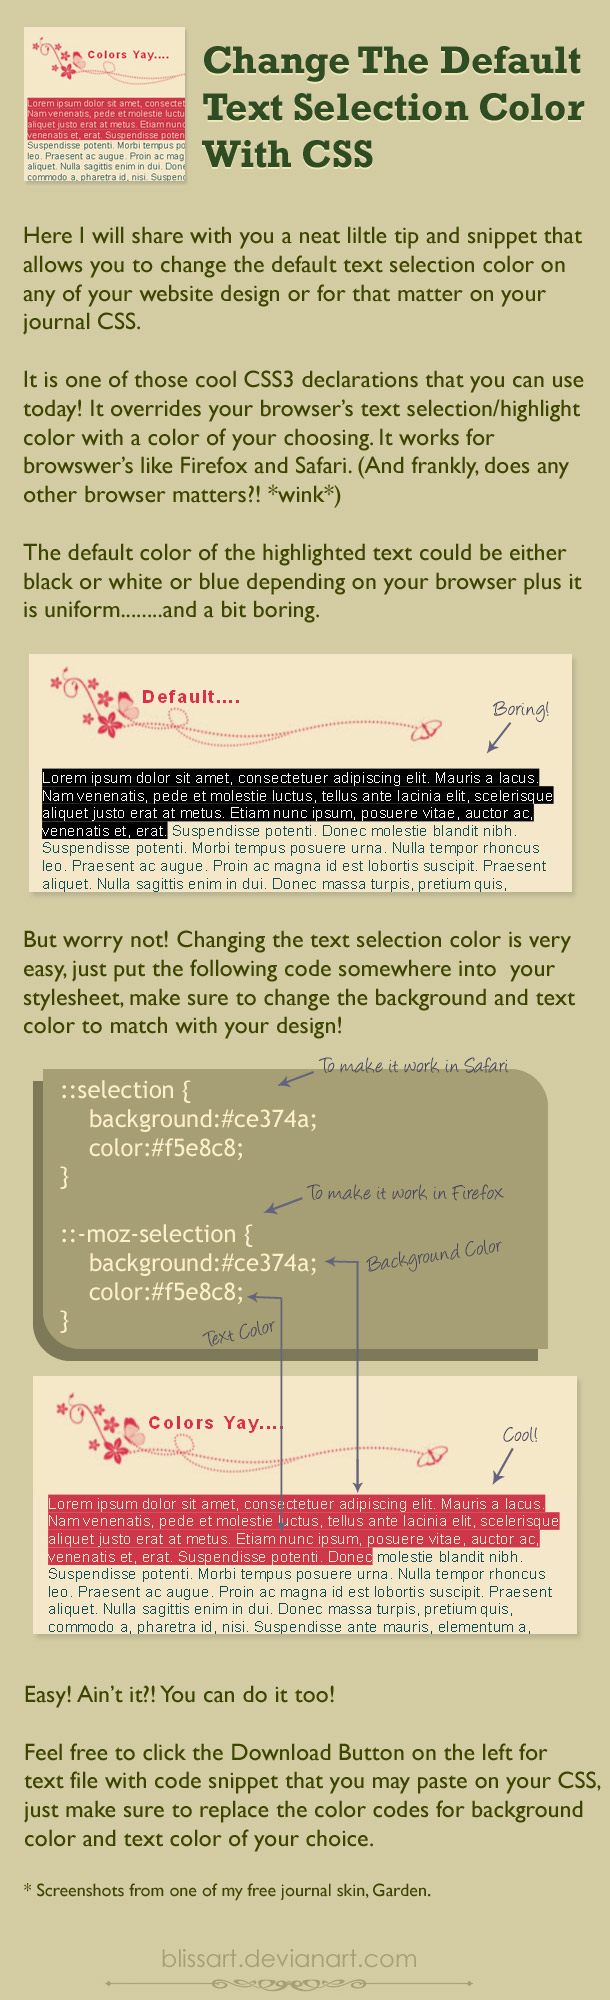 Change Text Selection Color